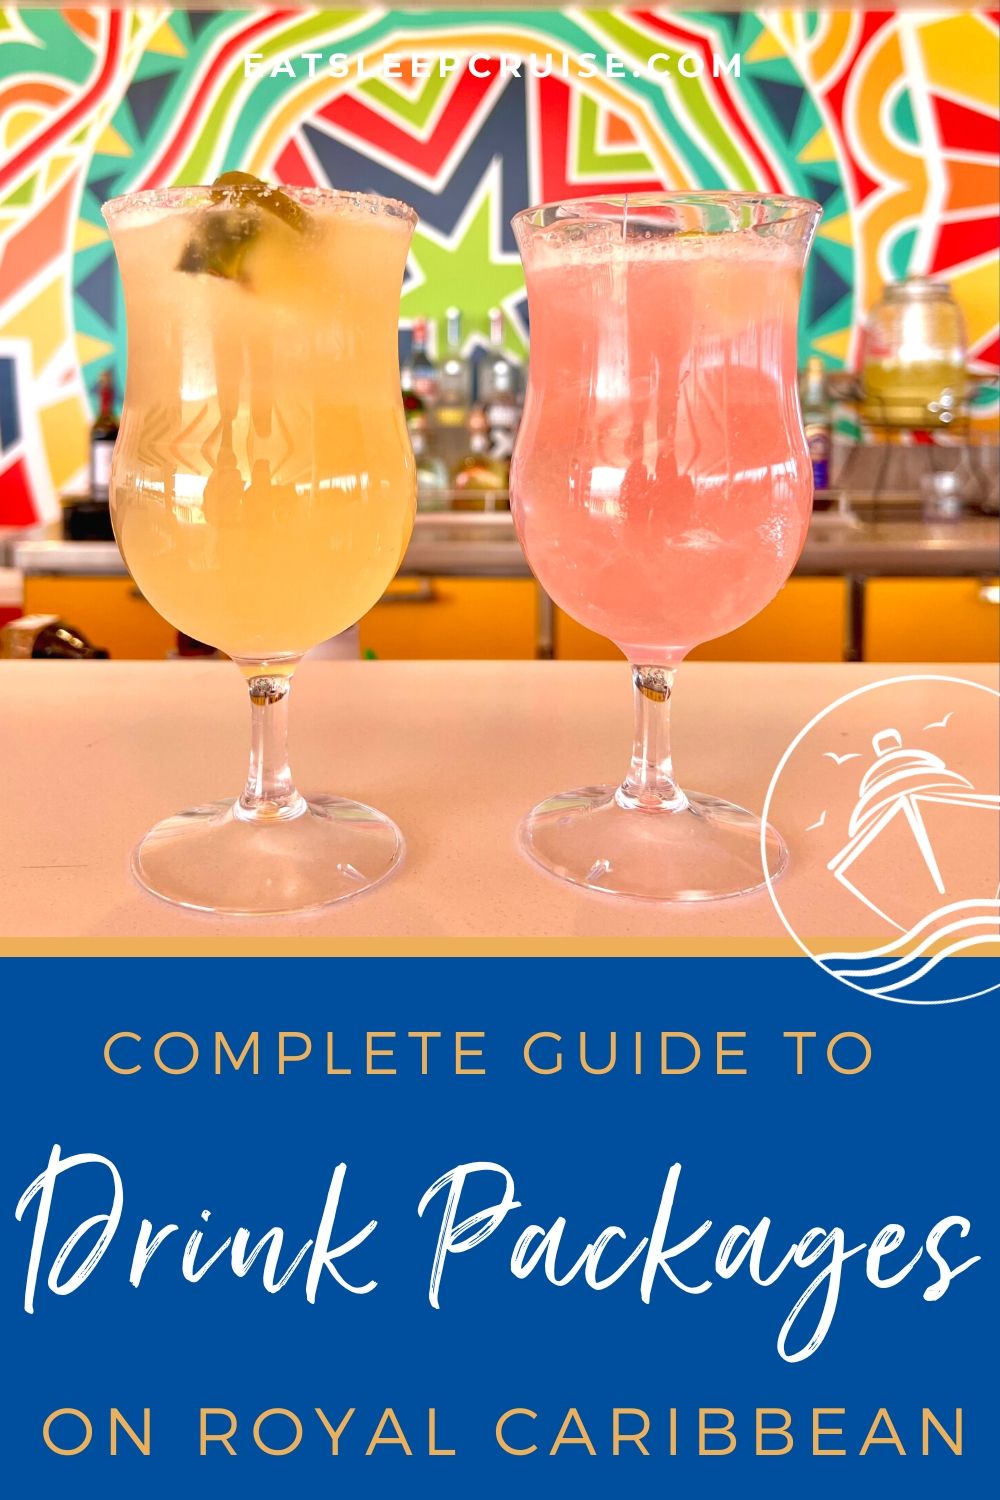 Royal Caribbean Drink Packages Guide 1